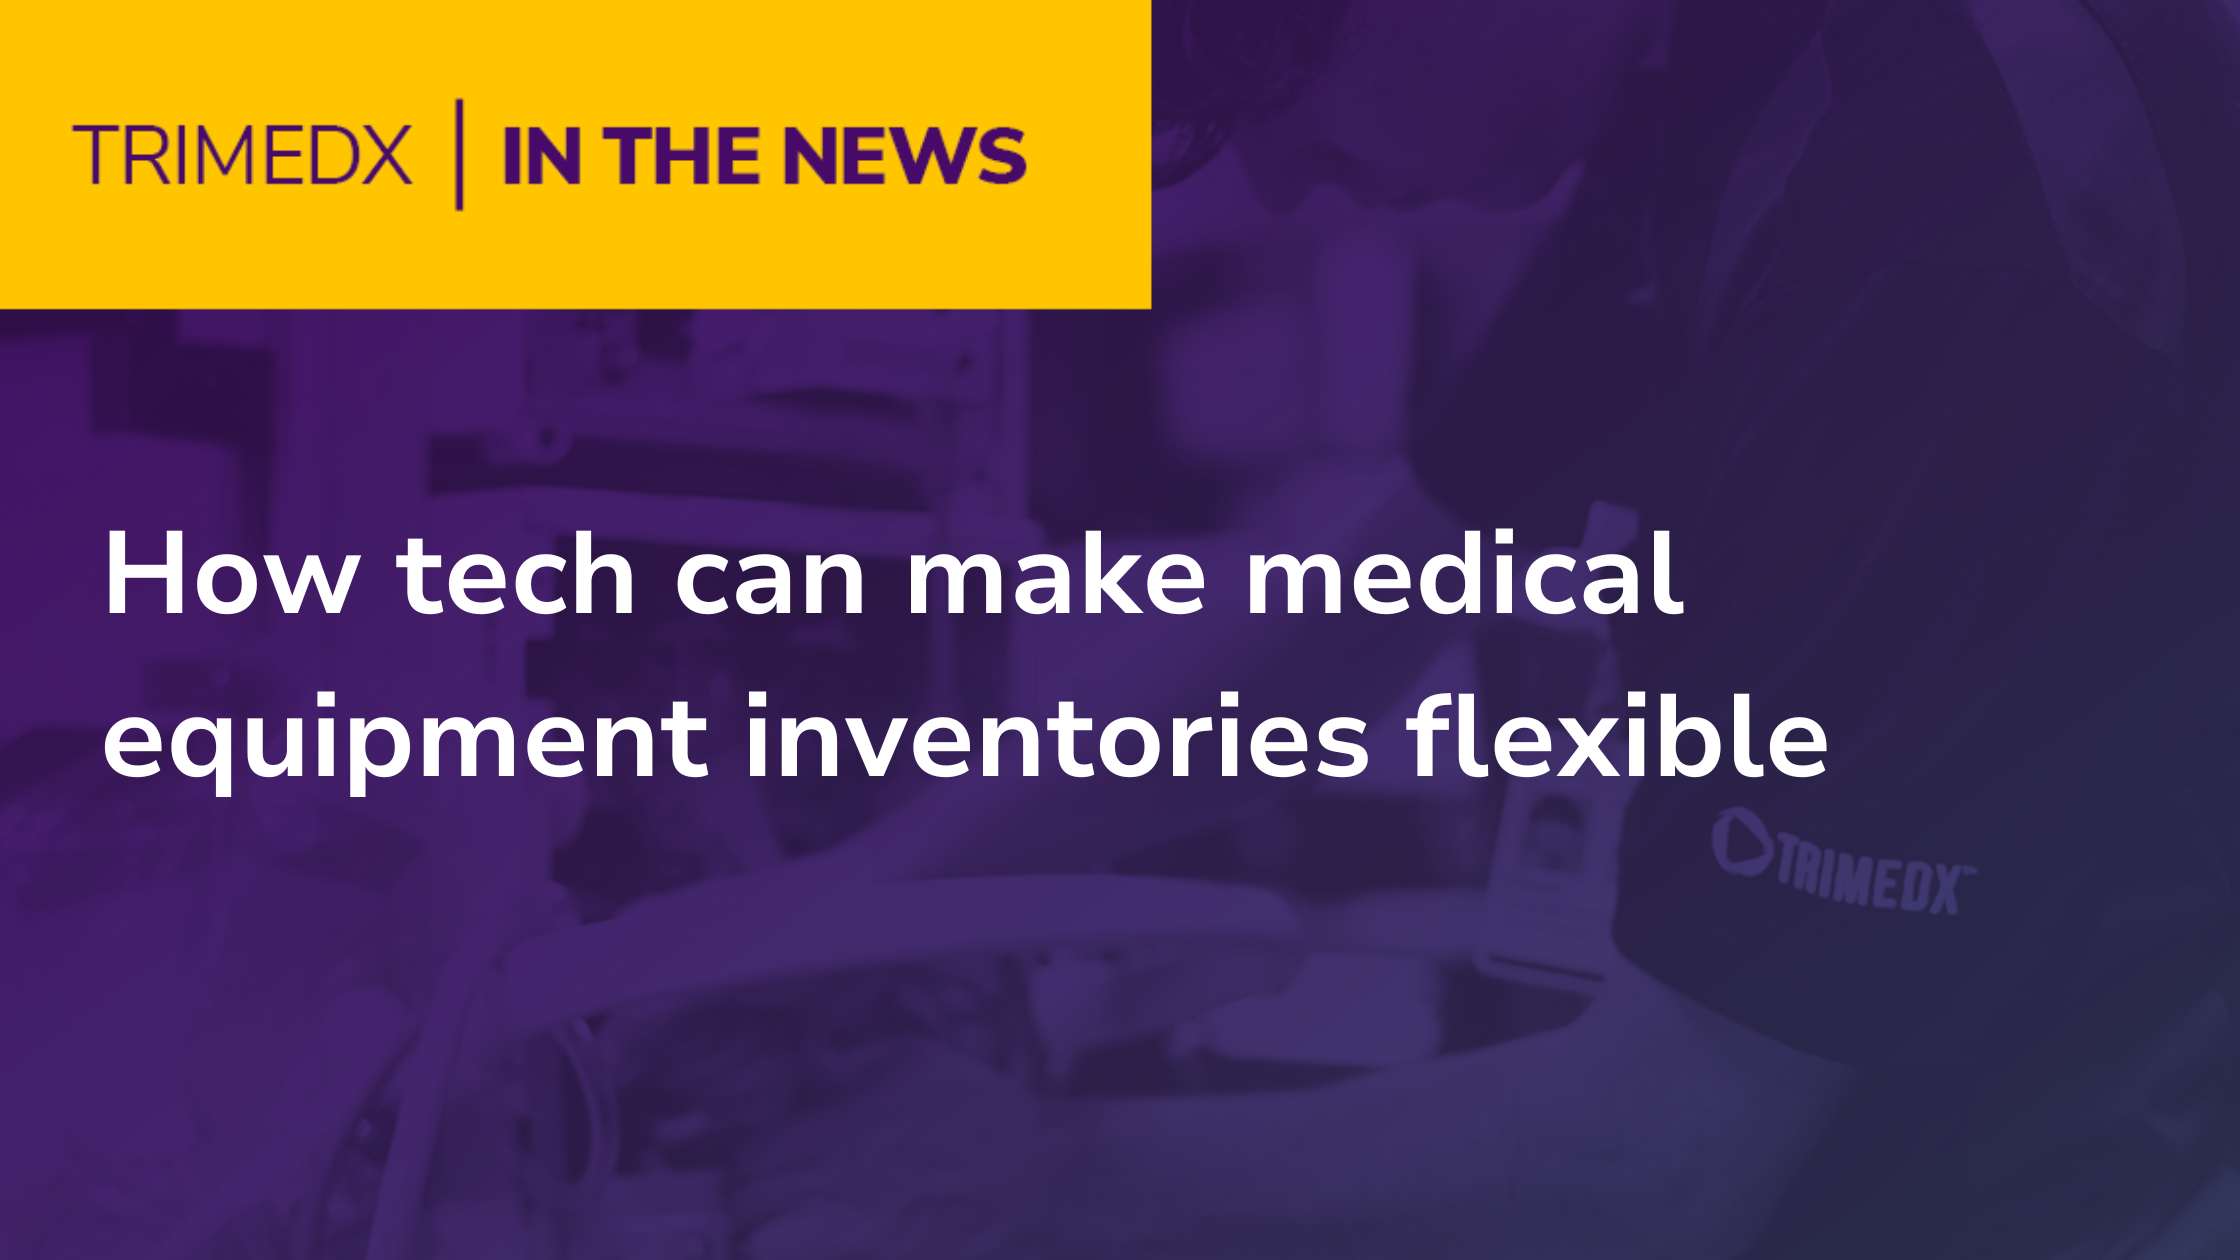 How tech can make medical equipment inventories flexible - TRIMEDX in the news